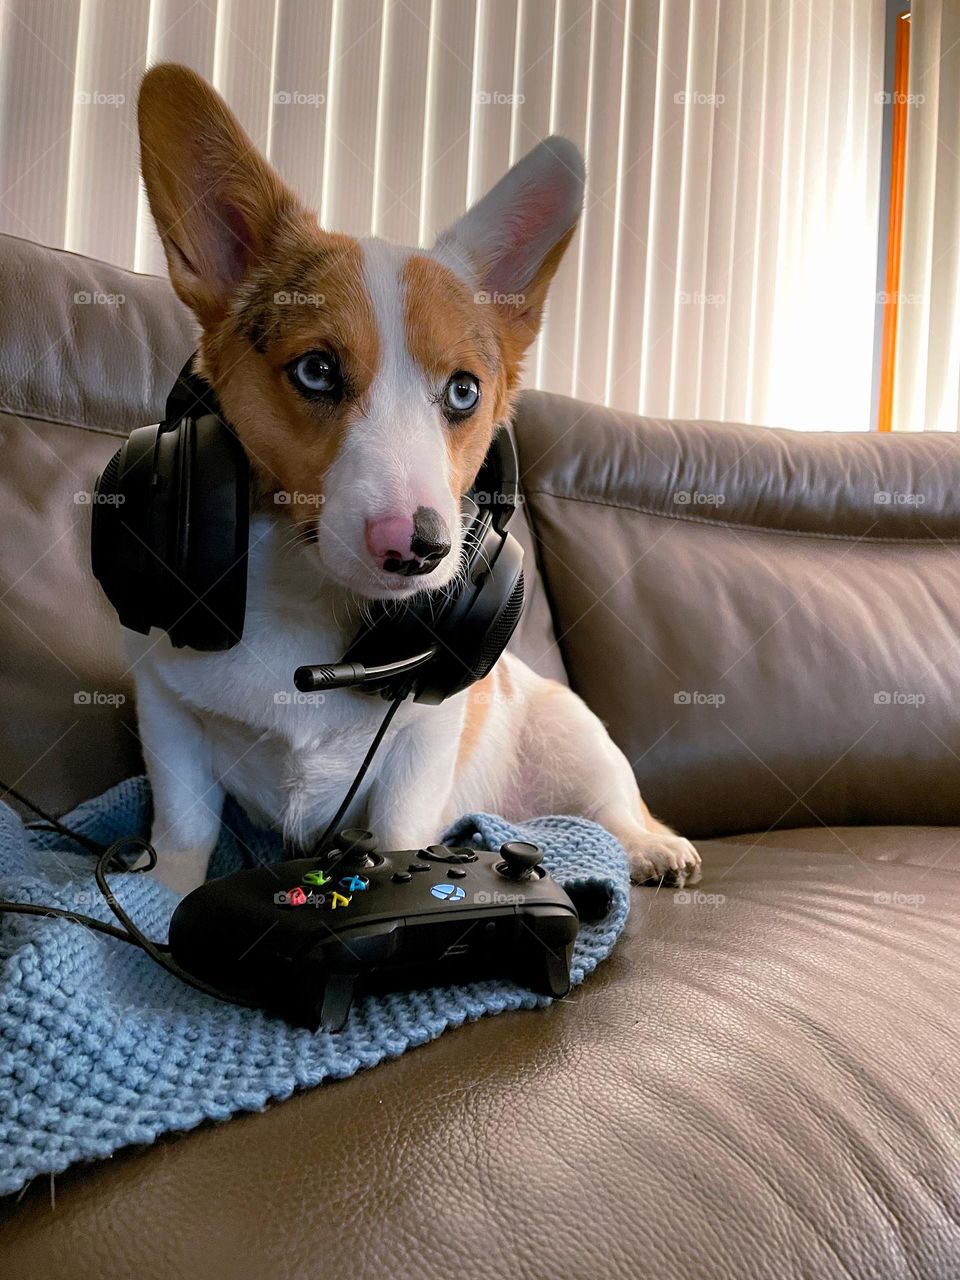 Corgi dog playing games gaming gamer pup cute adorable headphones headset controller photo photography picture photo 